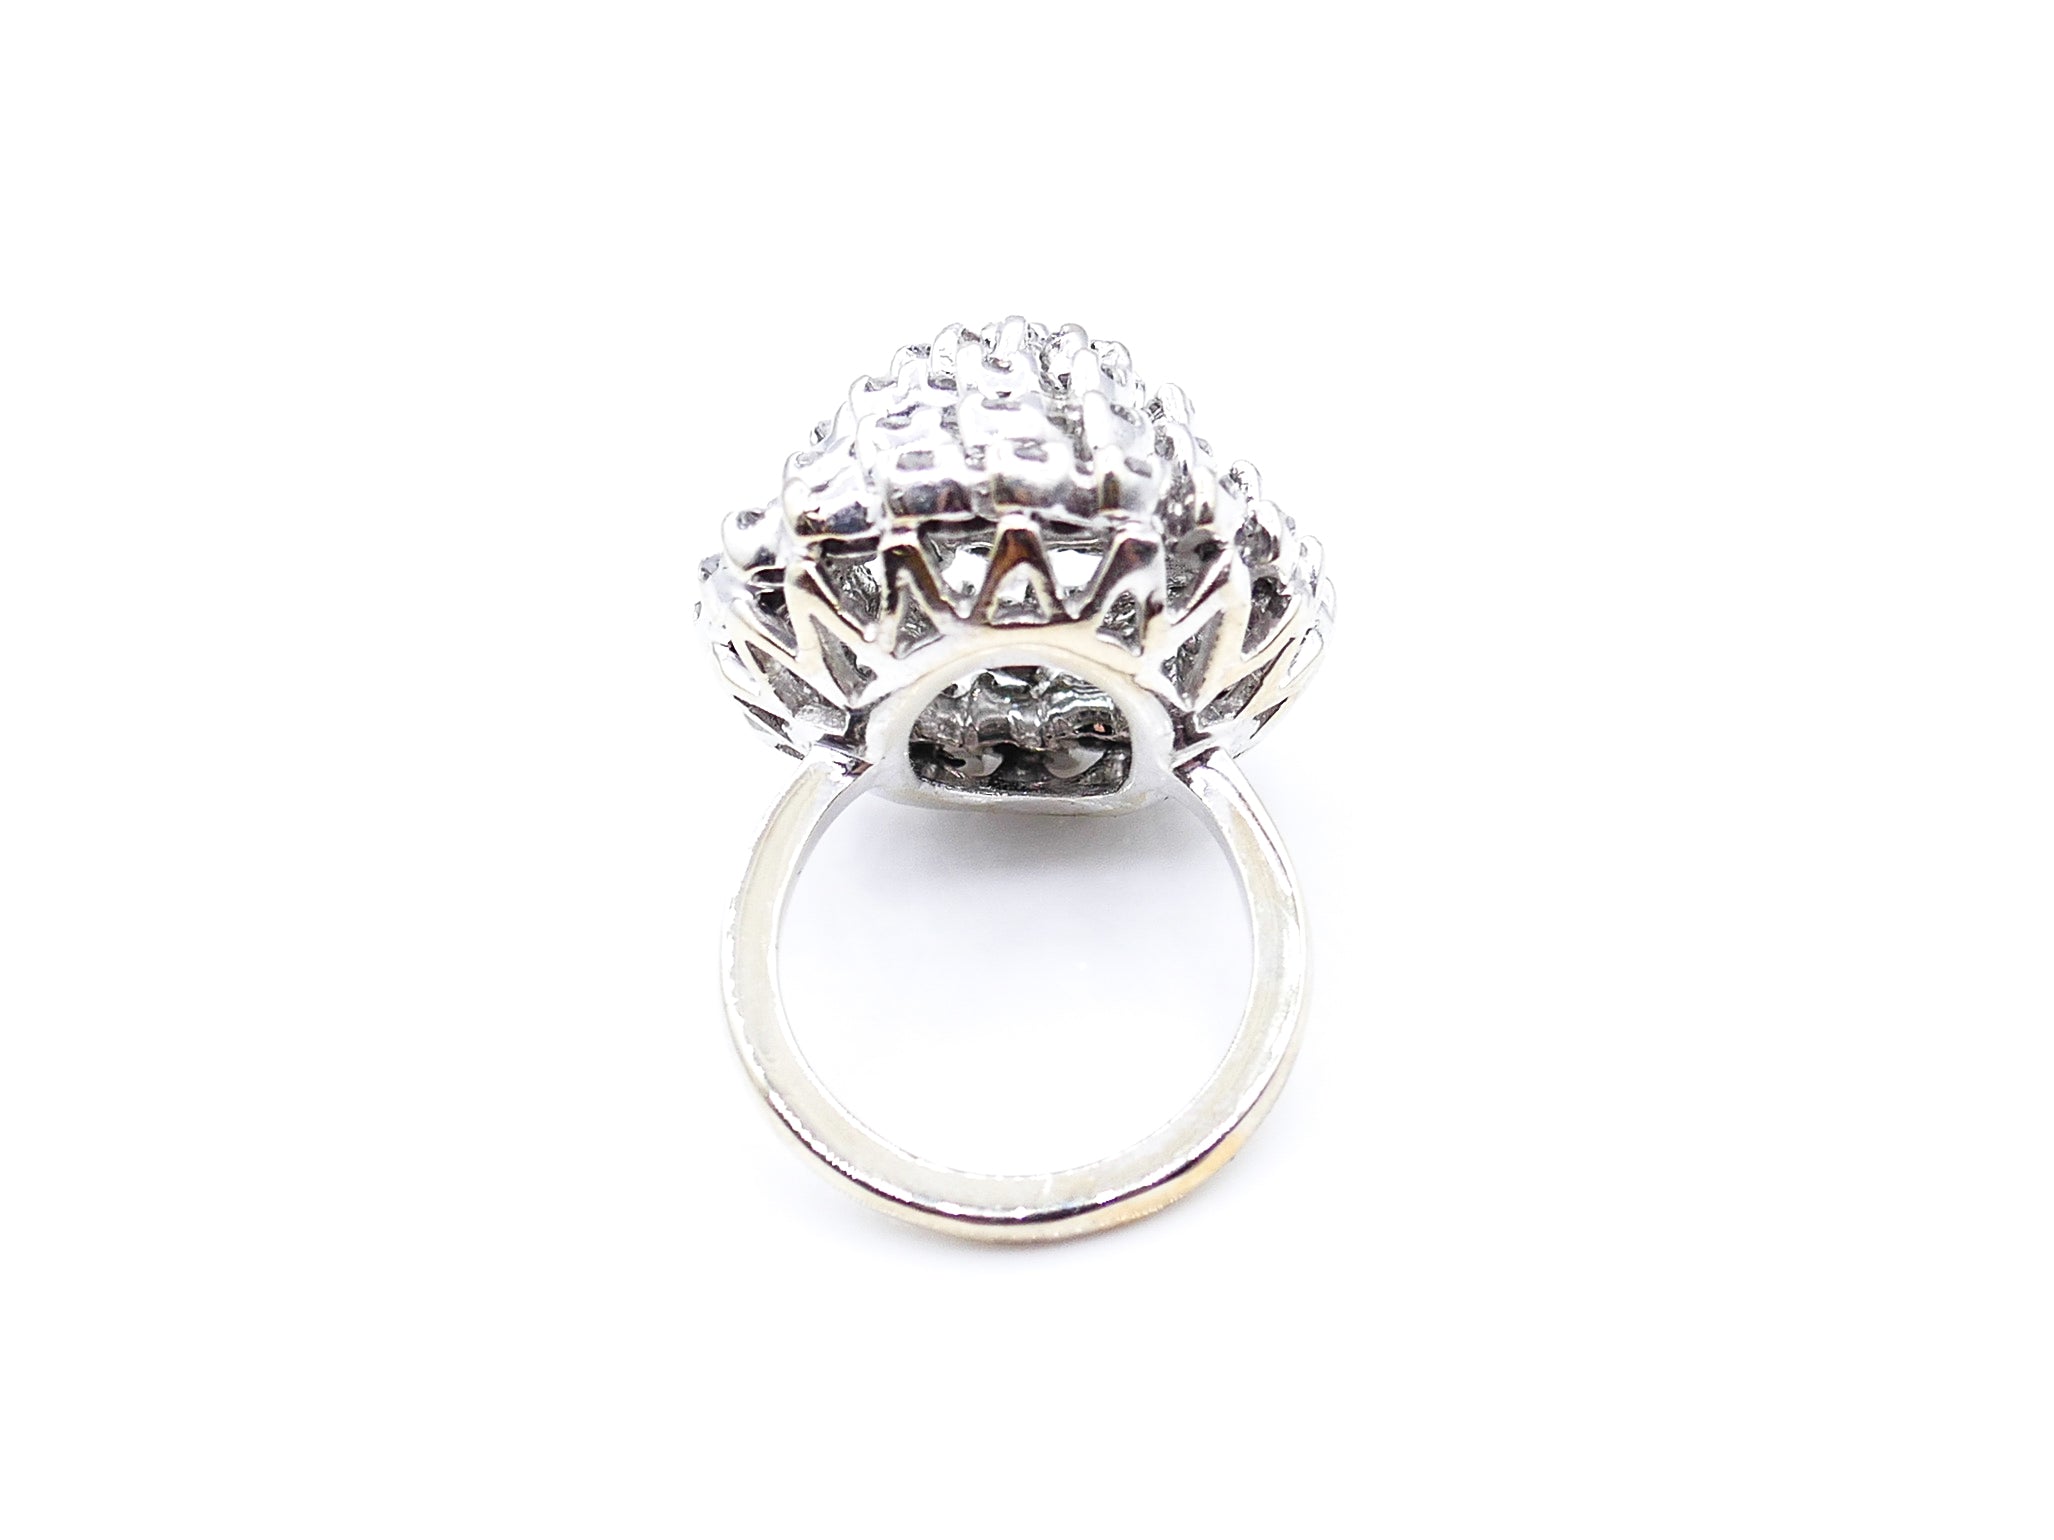 Antique Four Tier Diamond and White Gold Cocktail Ring